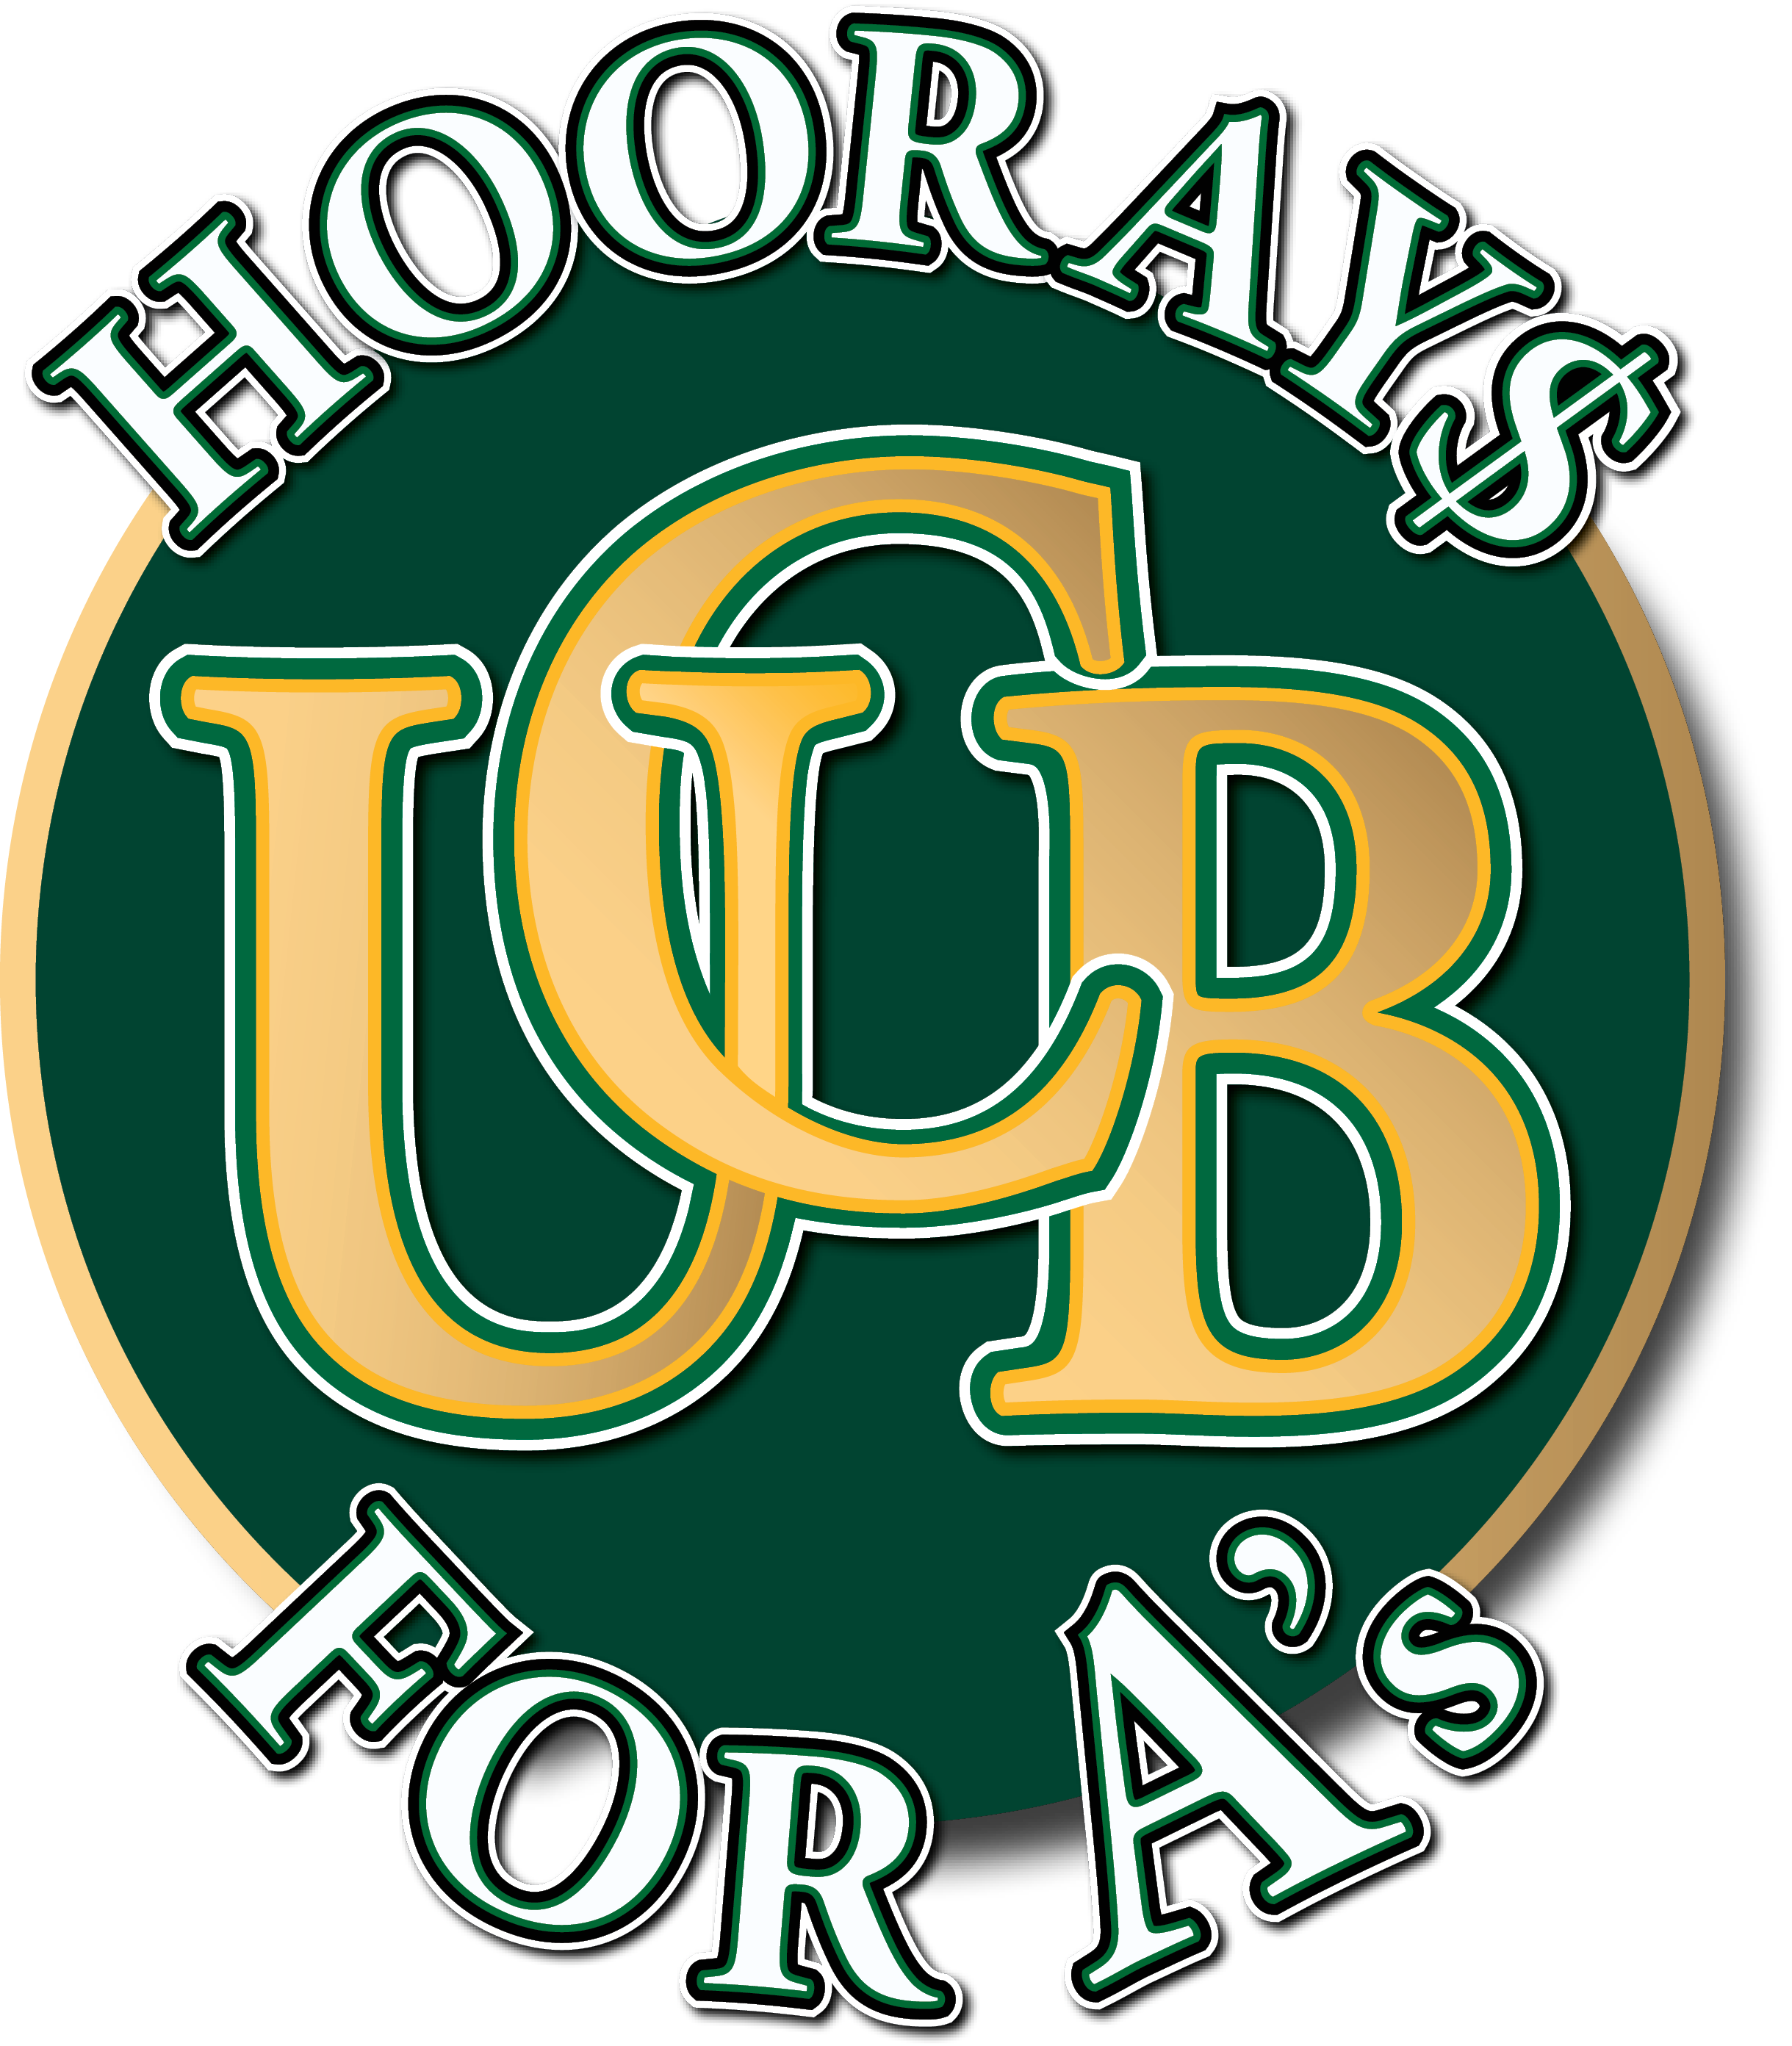 UCB Hoorays for A's Logo